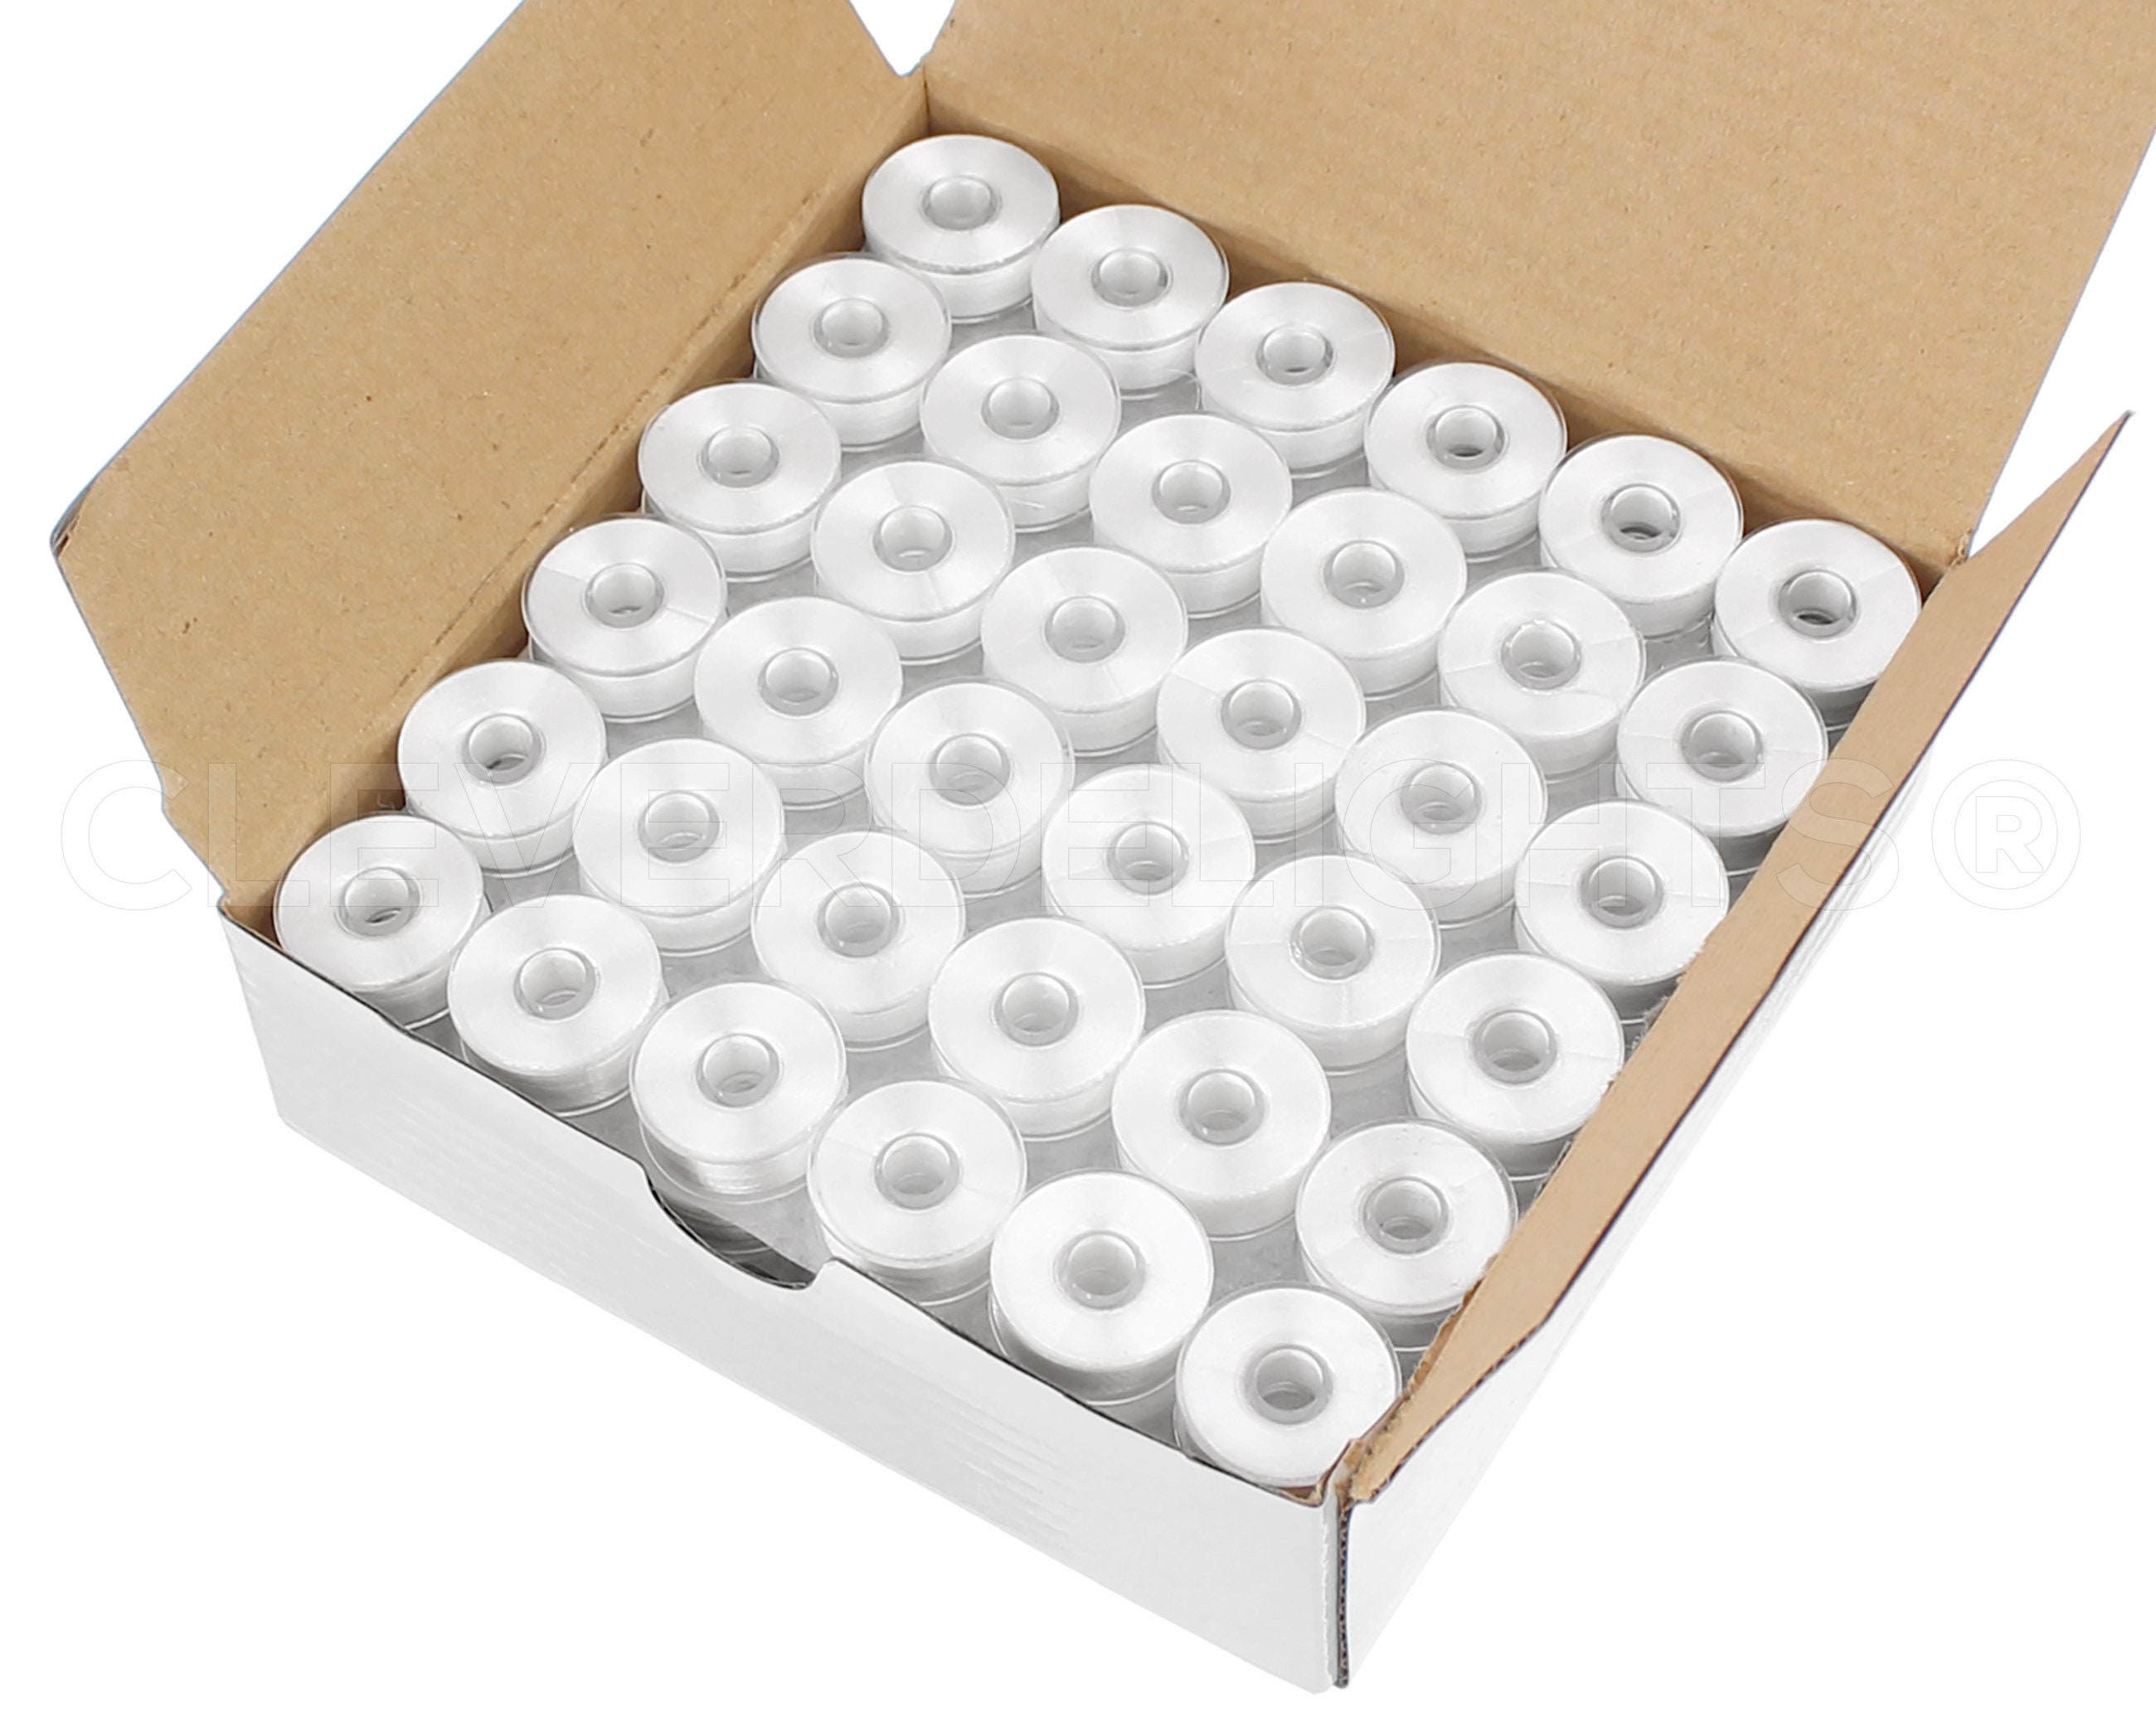 Set of 144 Embroidex 90 Weight Wt White Plastic Sided Prewound Bobbin  Thread Size 15/A 156 A for Brother Embroidery Machine